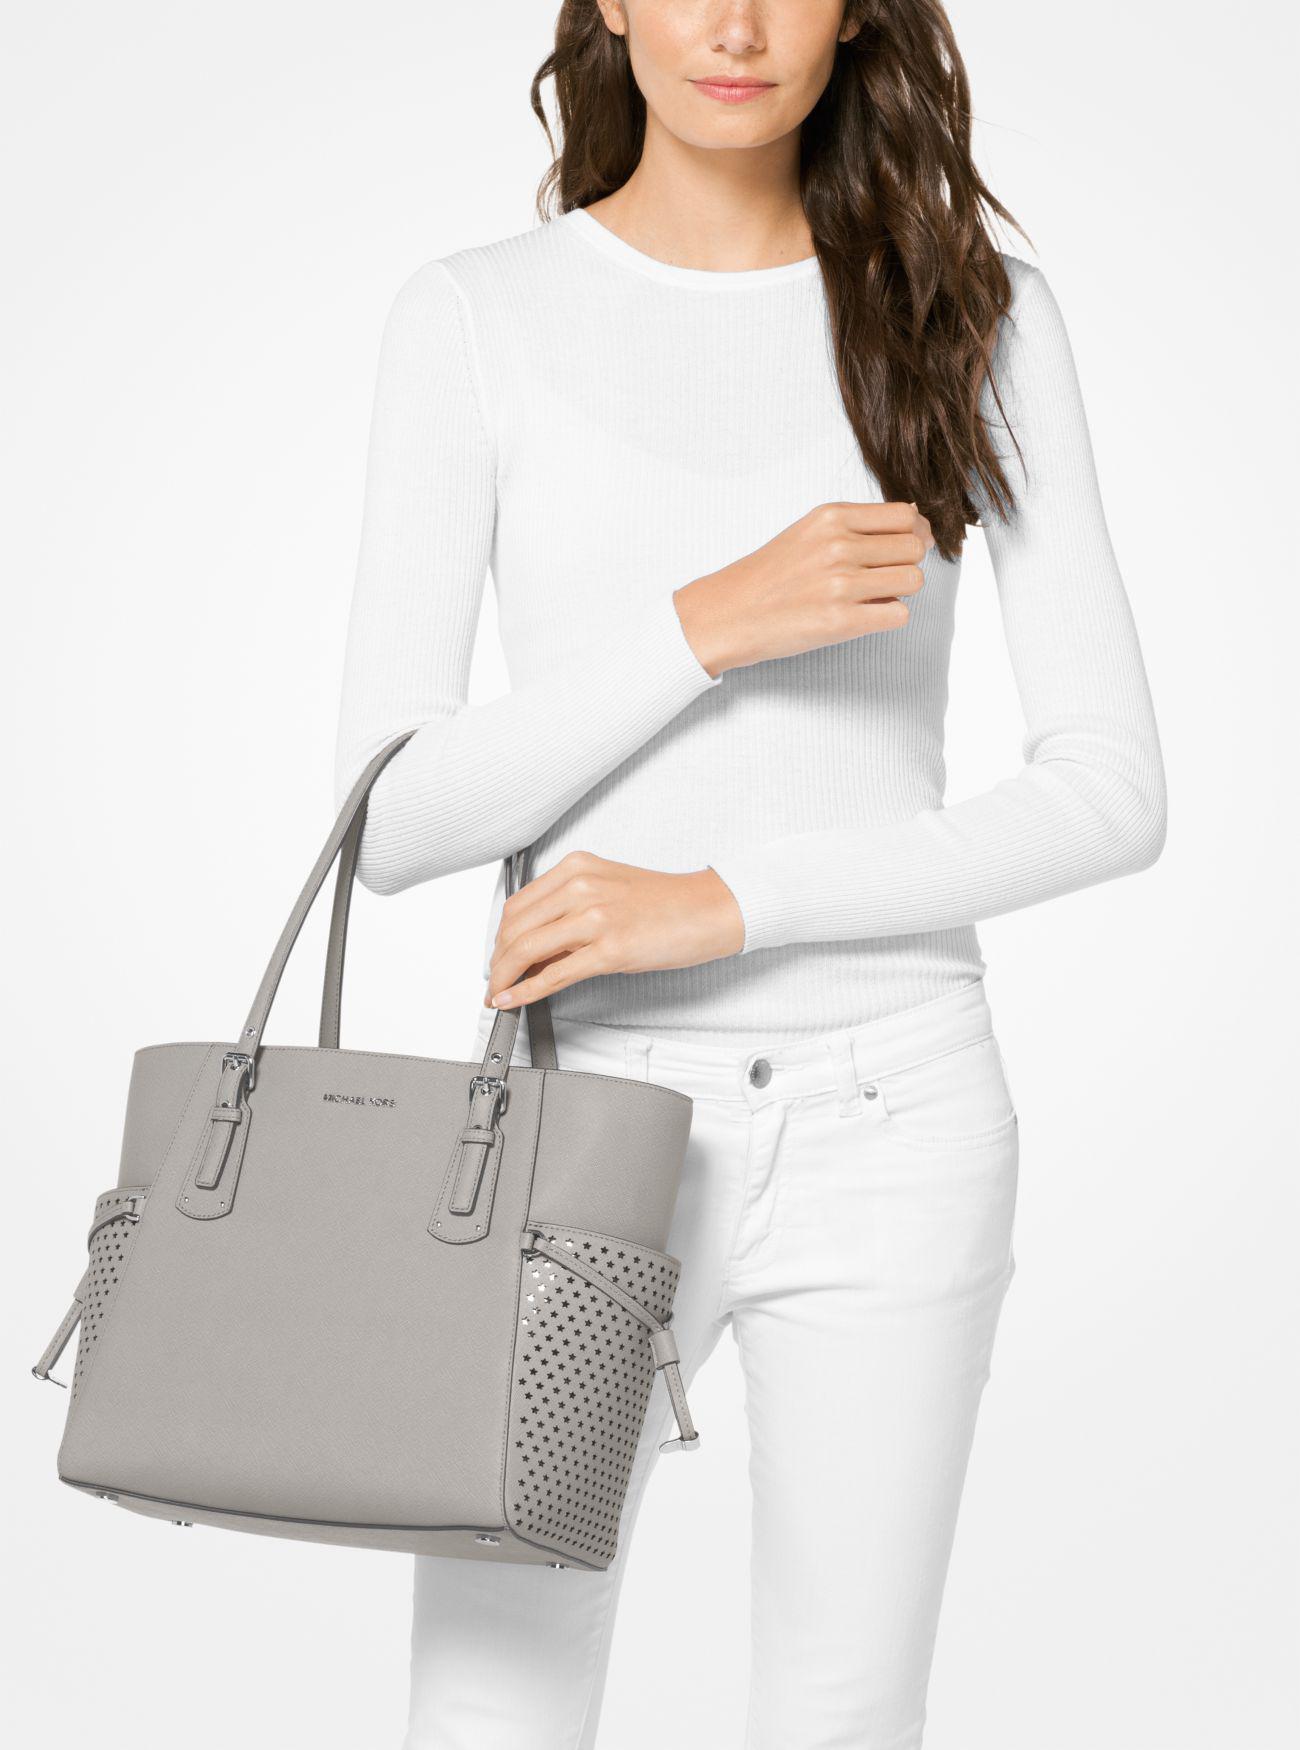 michael kors voyager small crossgrain leather tote